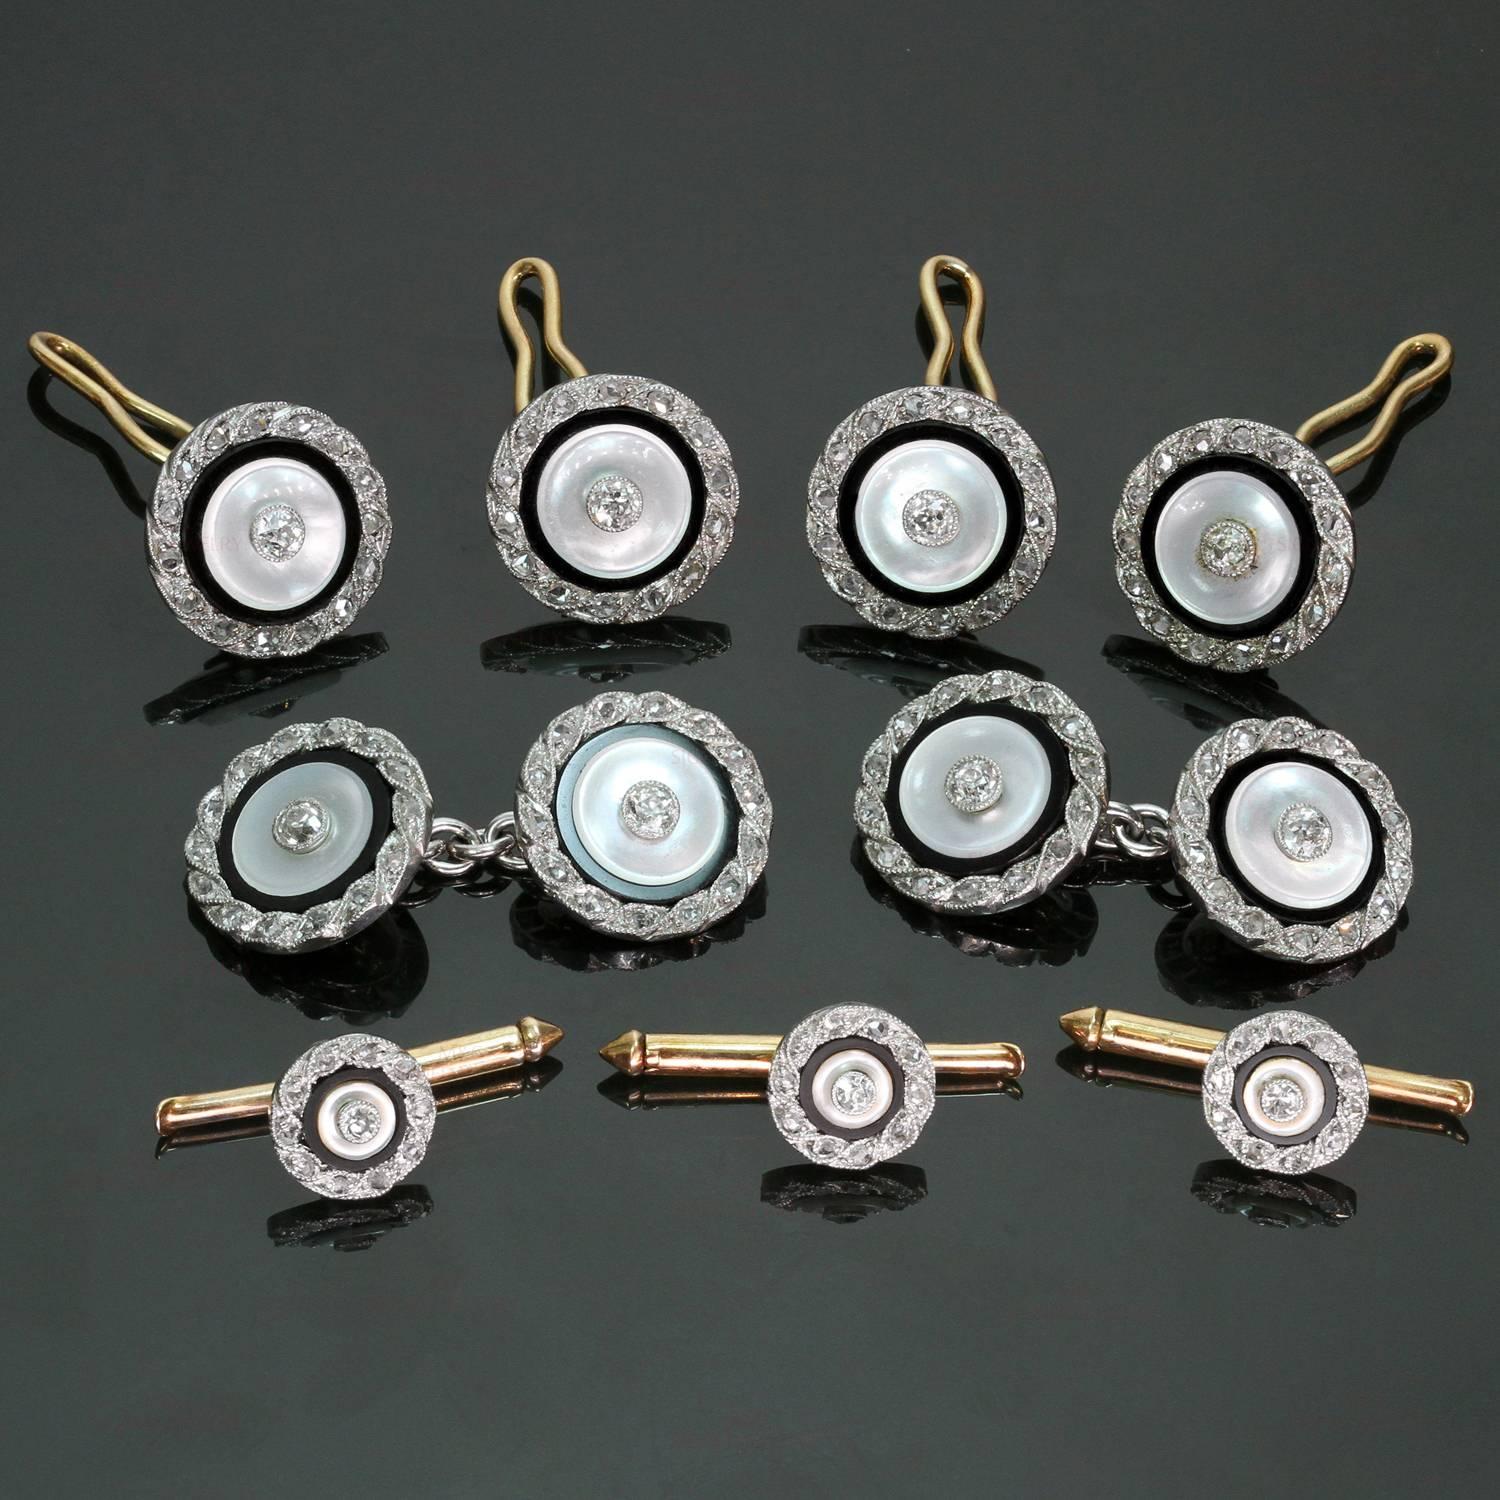 This fabulous Edwardian dress set Dreicer consists of a pair of cuff-links, a quartet of vest studs and a trio of shirt studs crafted in 14k yellow gold and features discs of black onyx and mother-of-pearl studded in the center with round diamonds